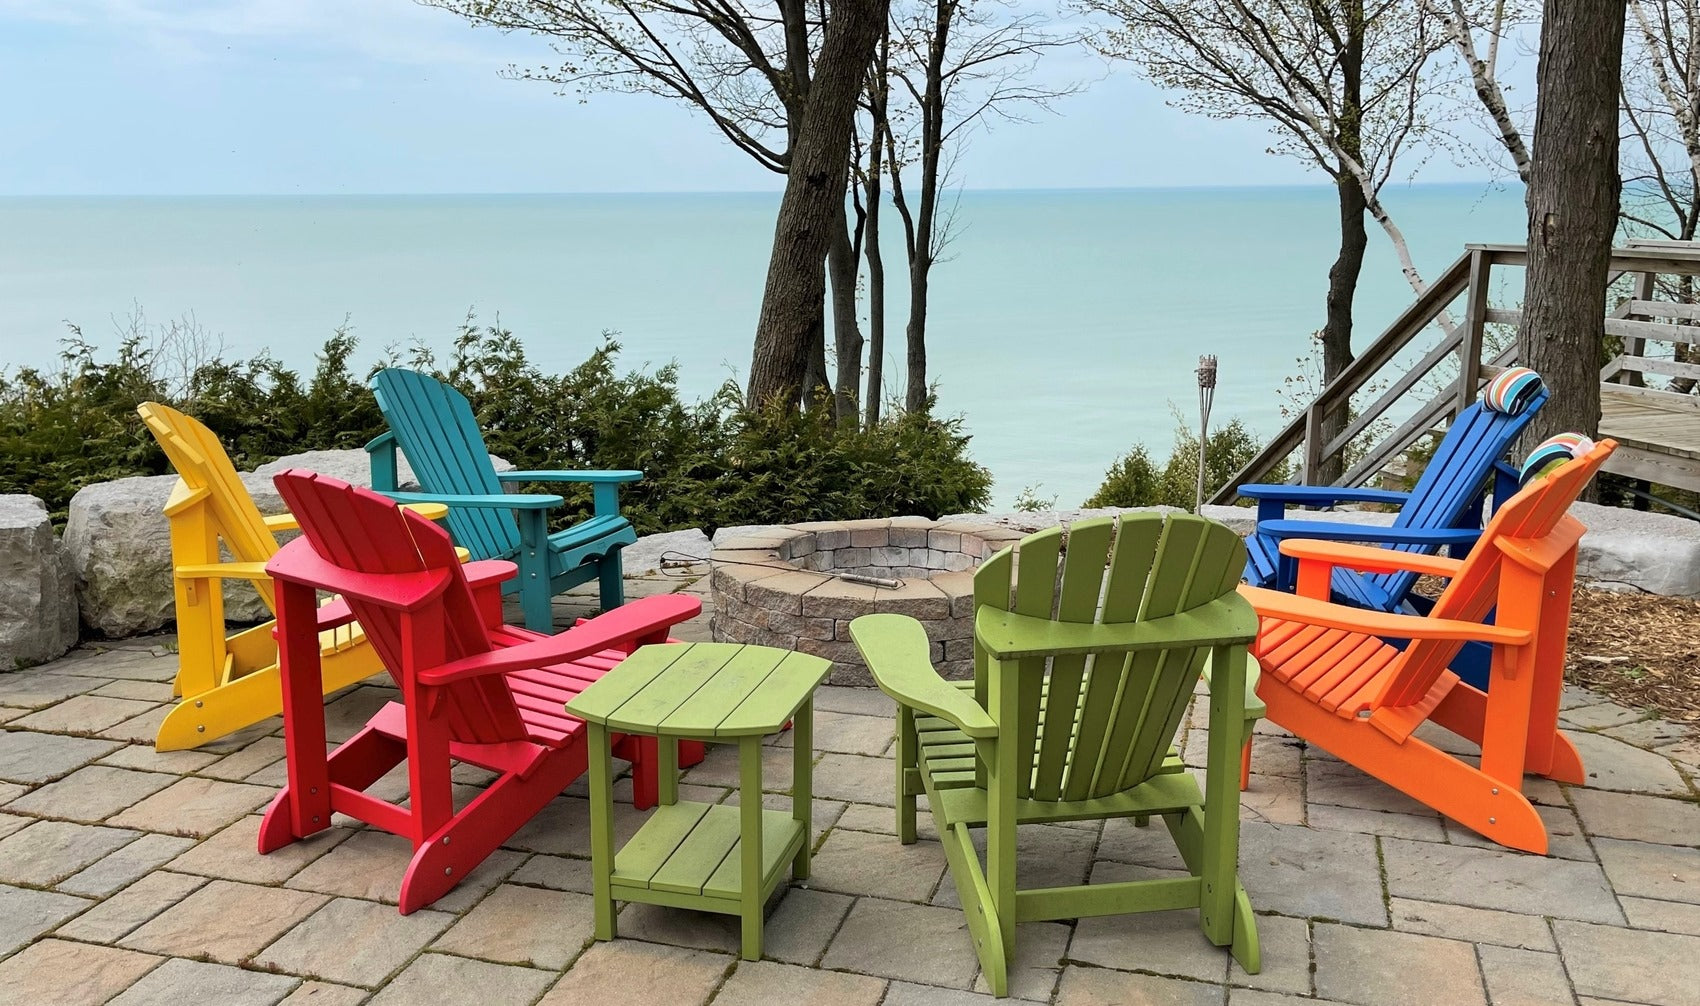 What's the difference between an Adirondack and Muskoka Chair?